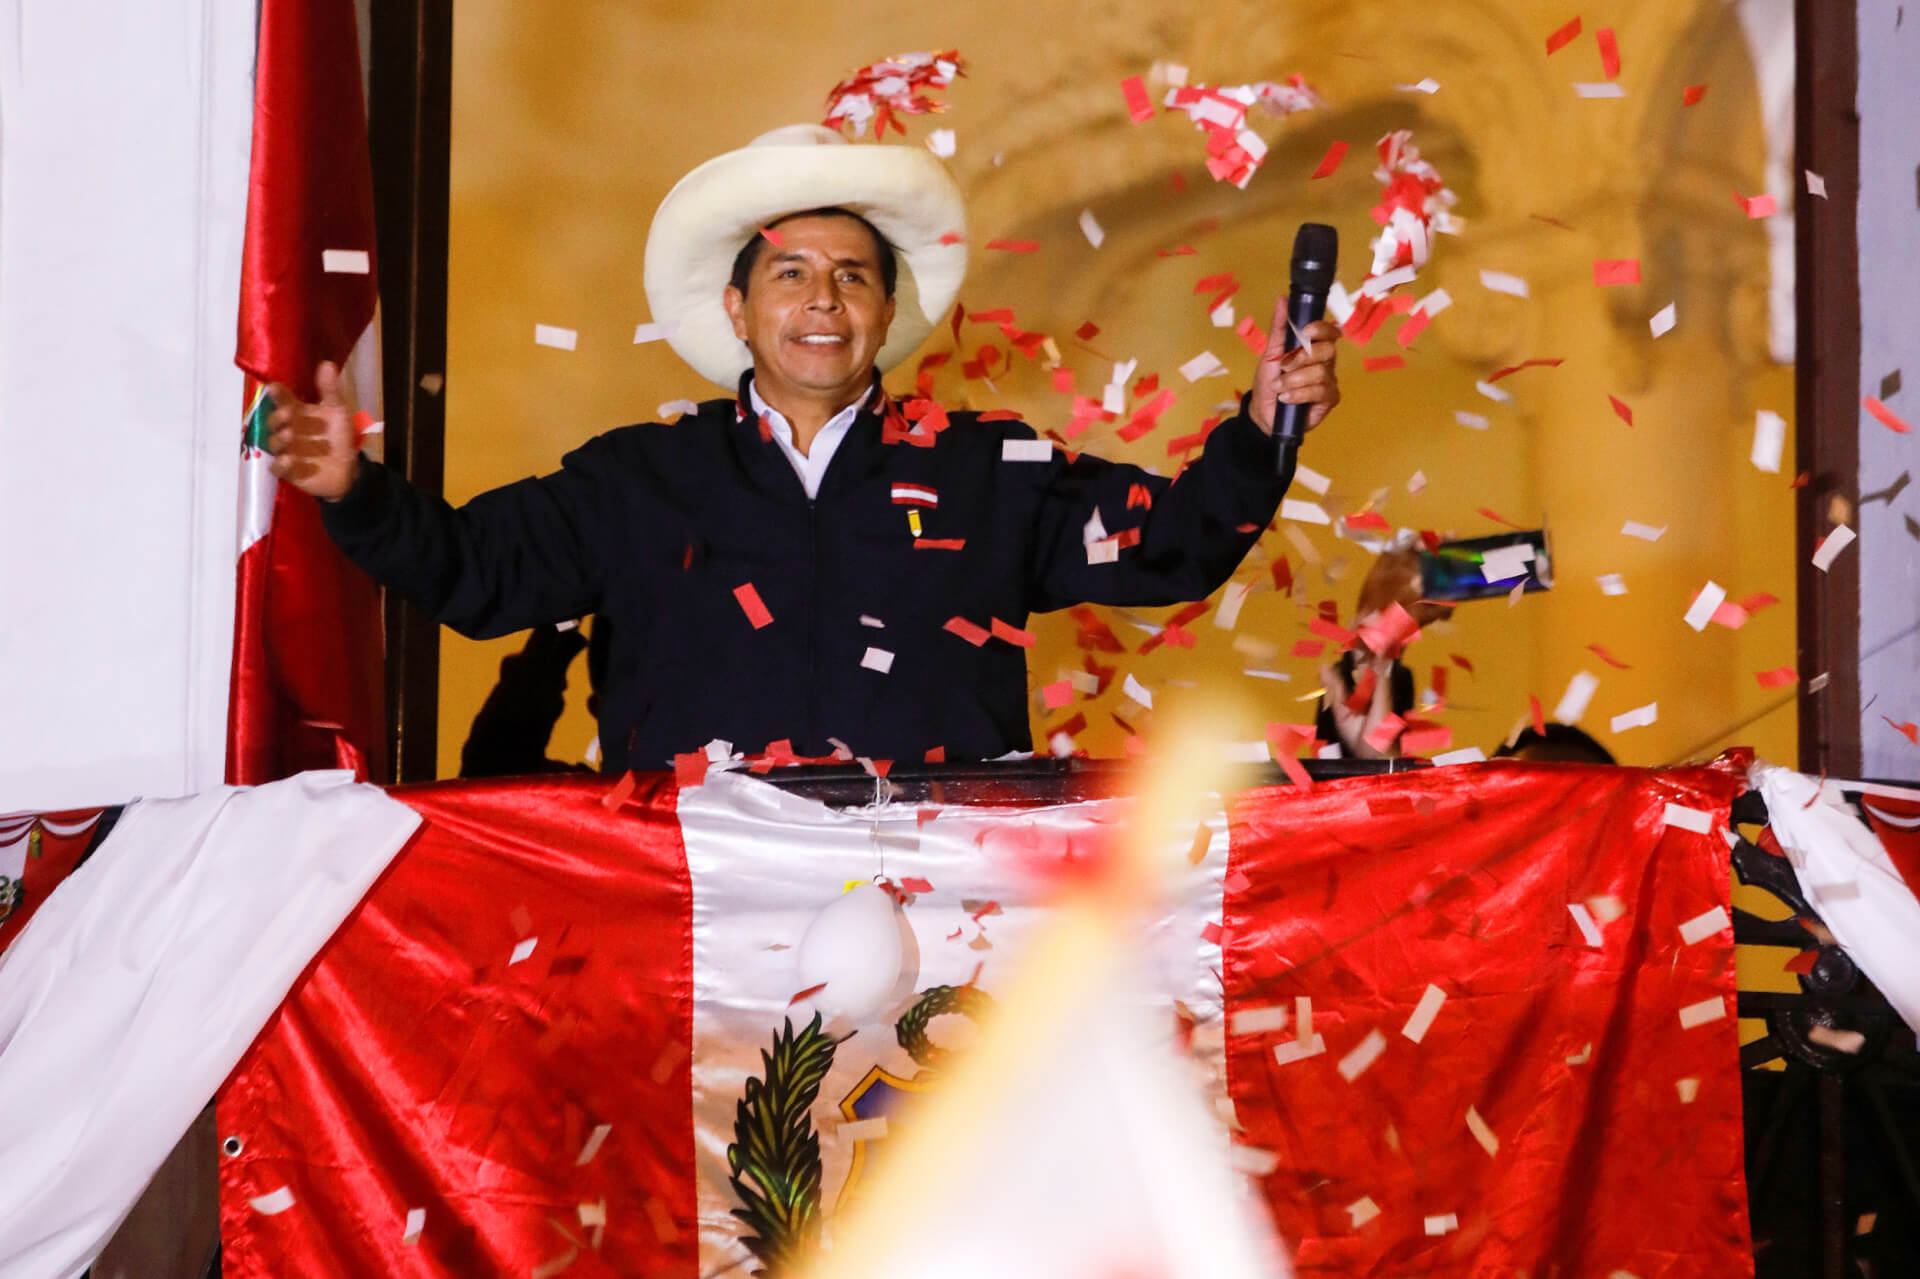 Castillo Emerges as Victor of Peru’s Election With 50.2% of Votes, Fujimori Alleges Fraud